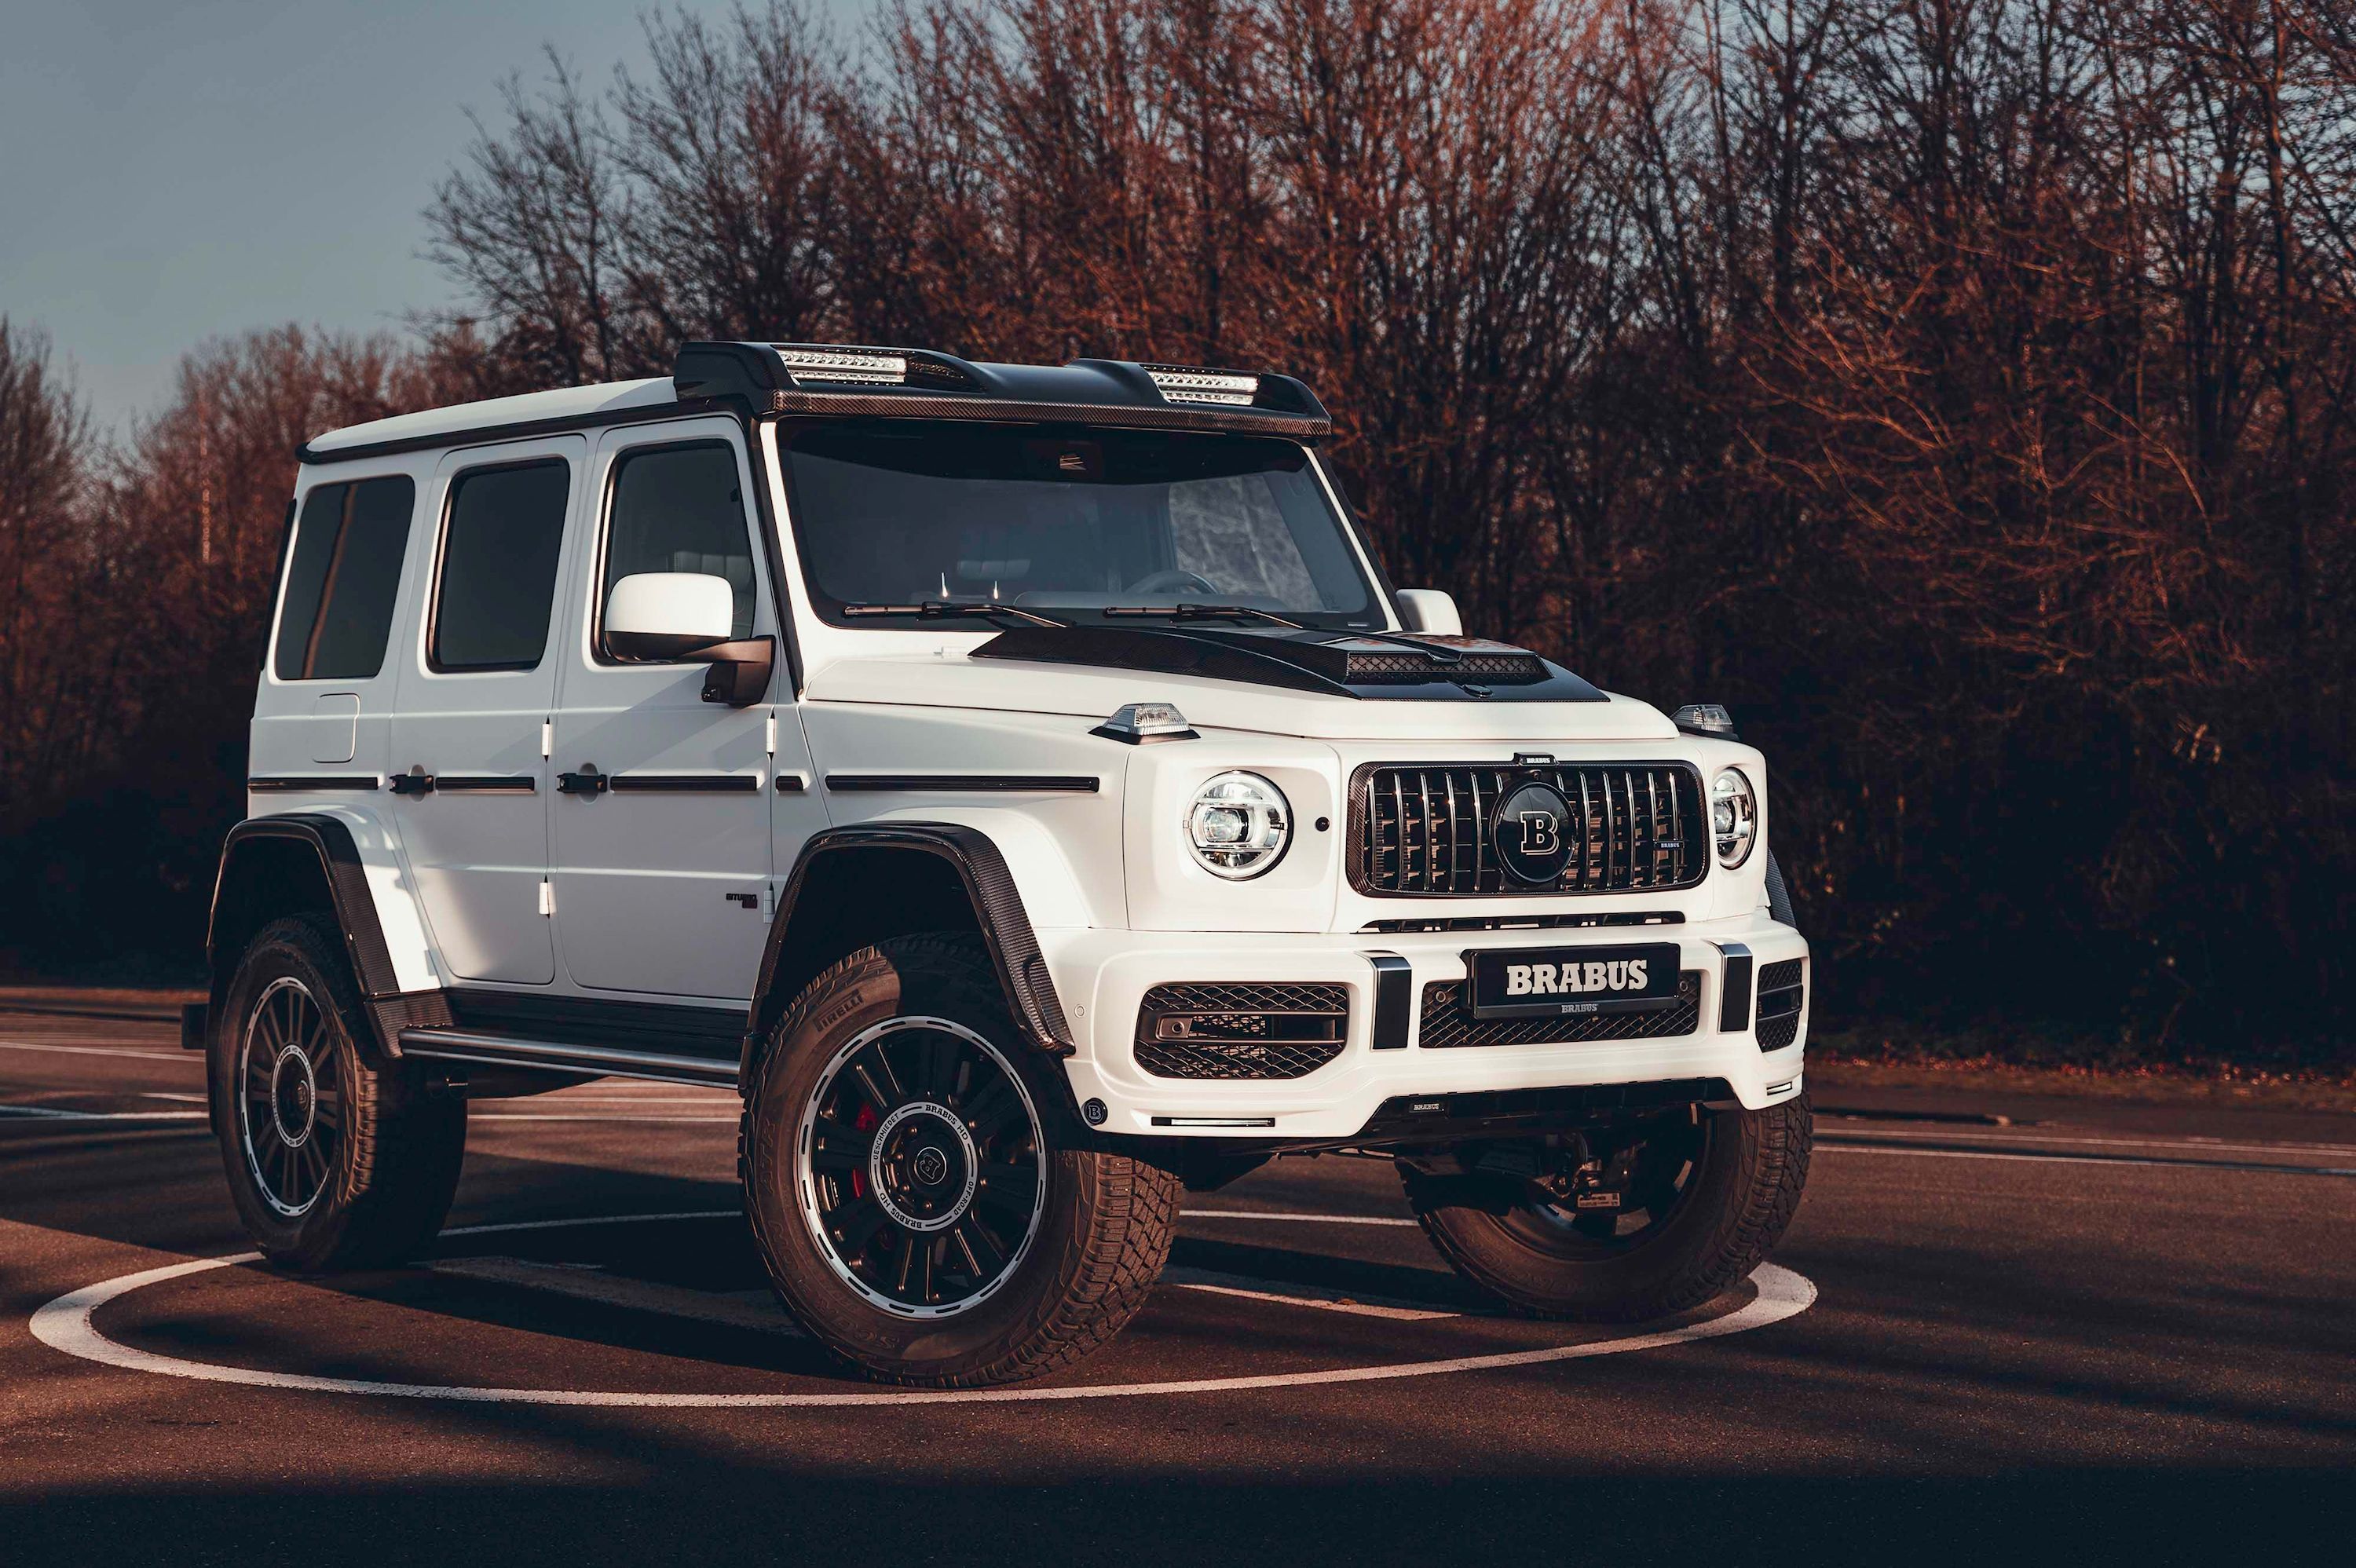 Brabus Mutates a Mercedes-AMG G63 Into a Pickup Smothered in Carbon Fiber